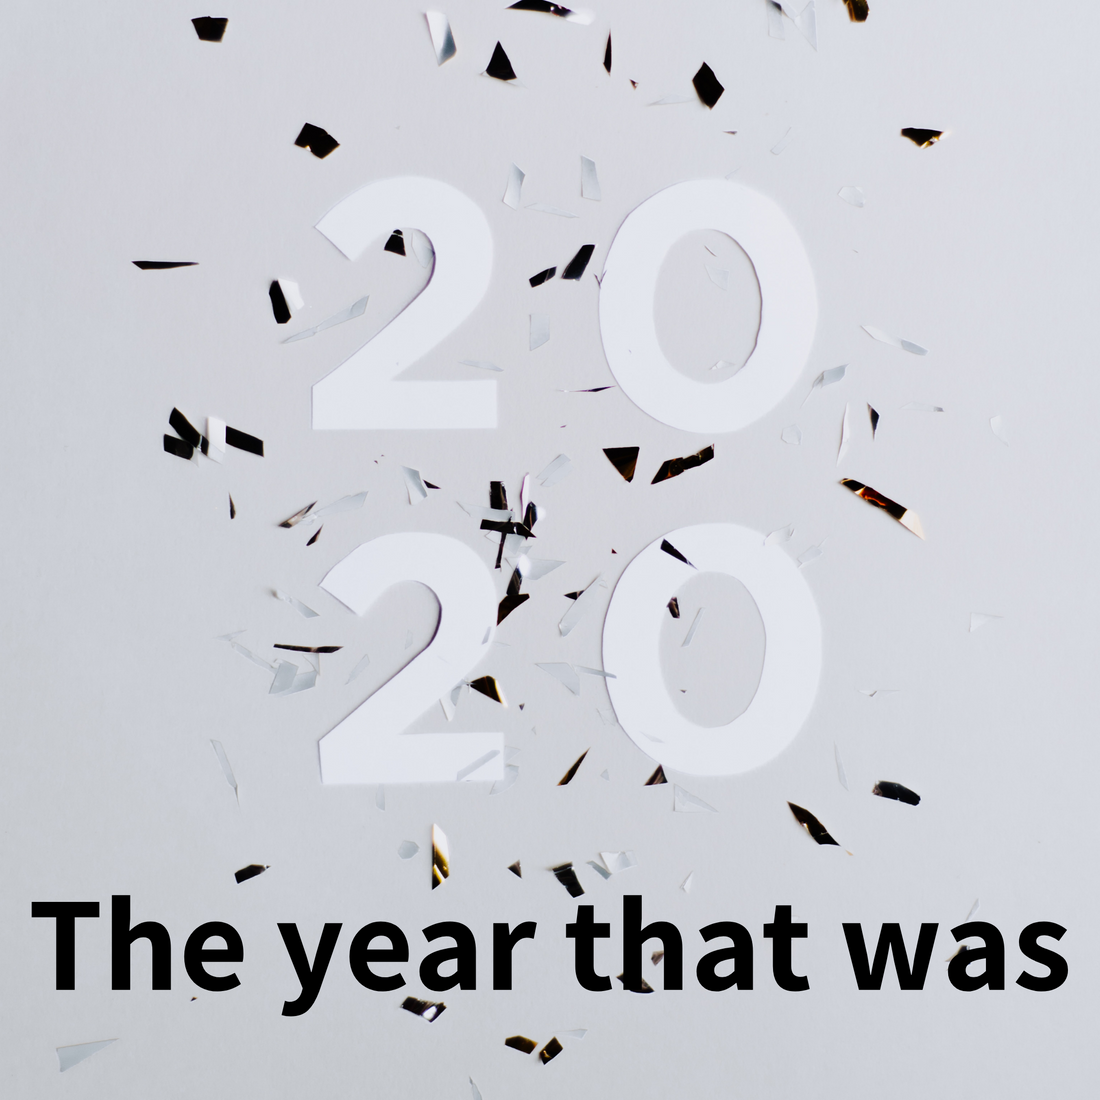 2020- The year that was